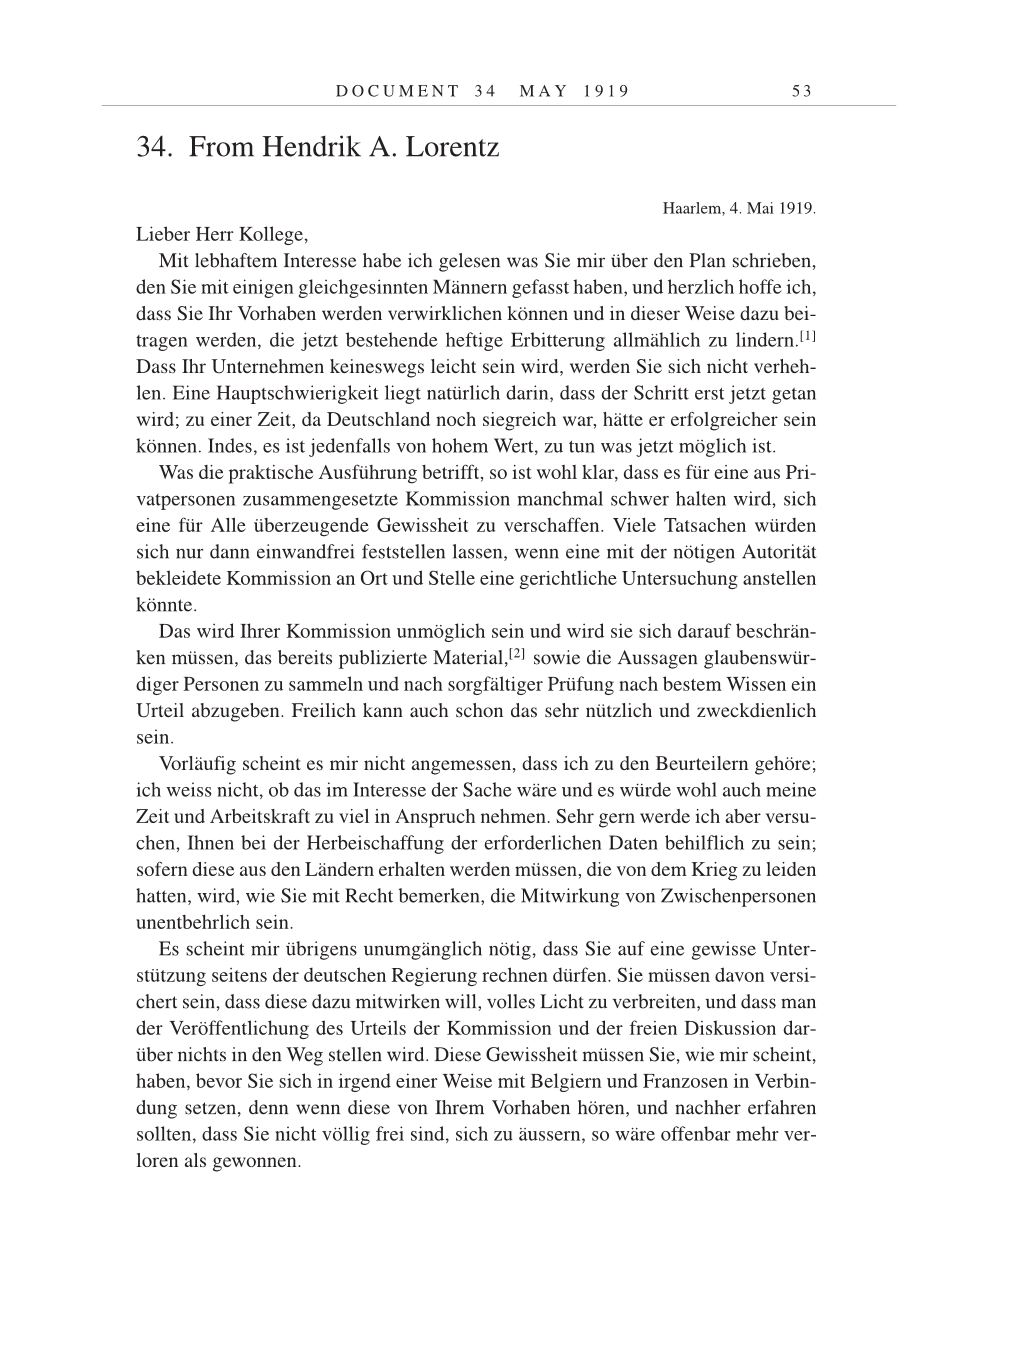 Volume 9: The Berlin Years: Correspondence January 1919-April 1920 page 53